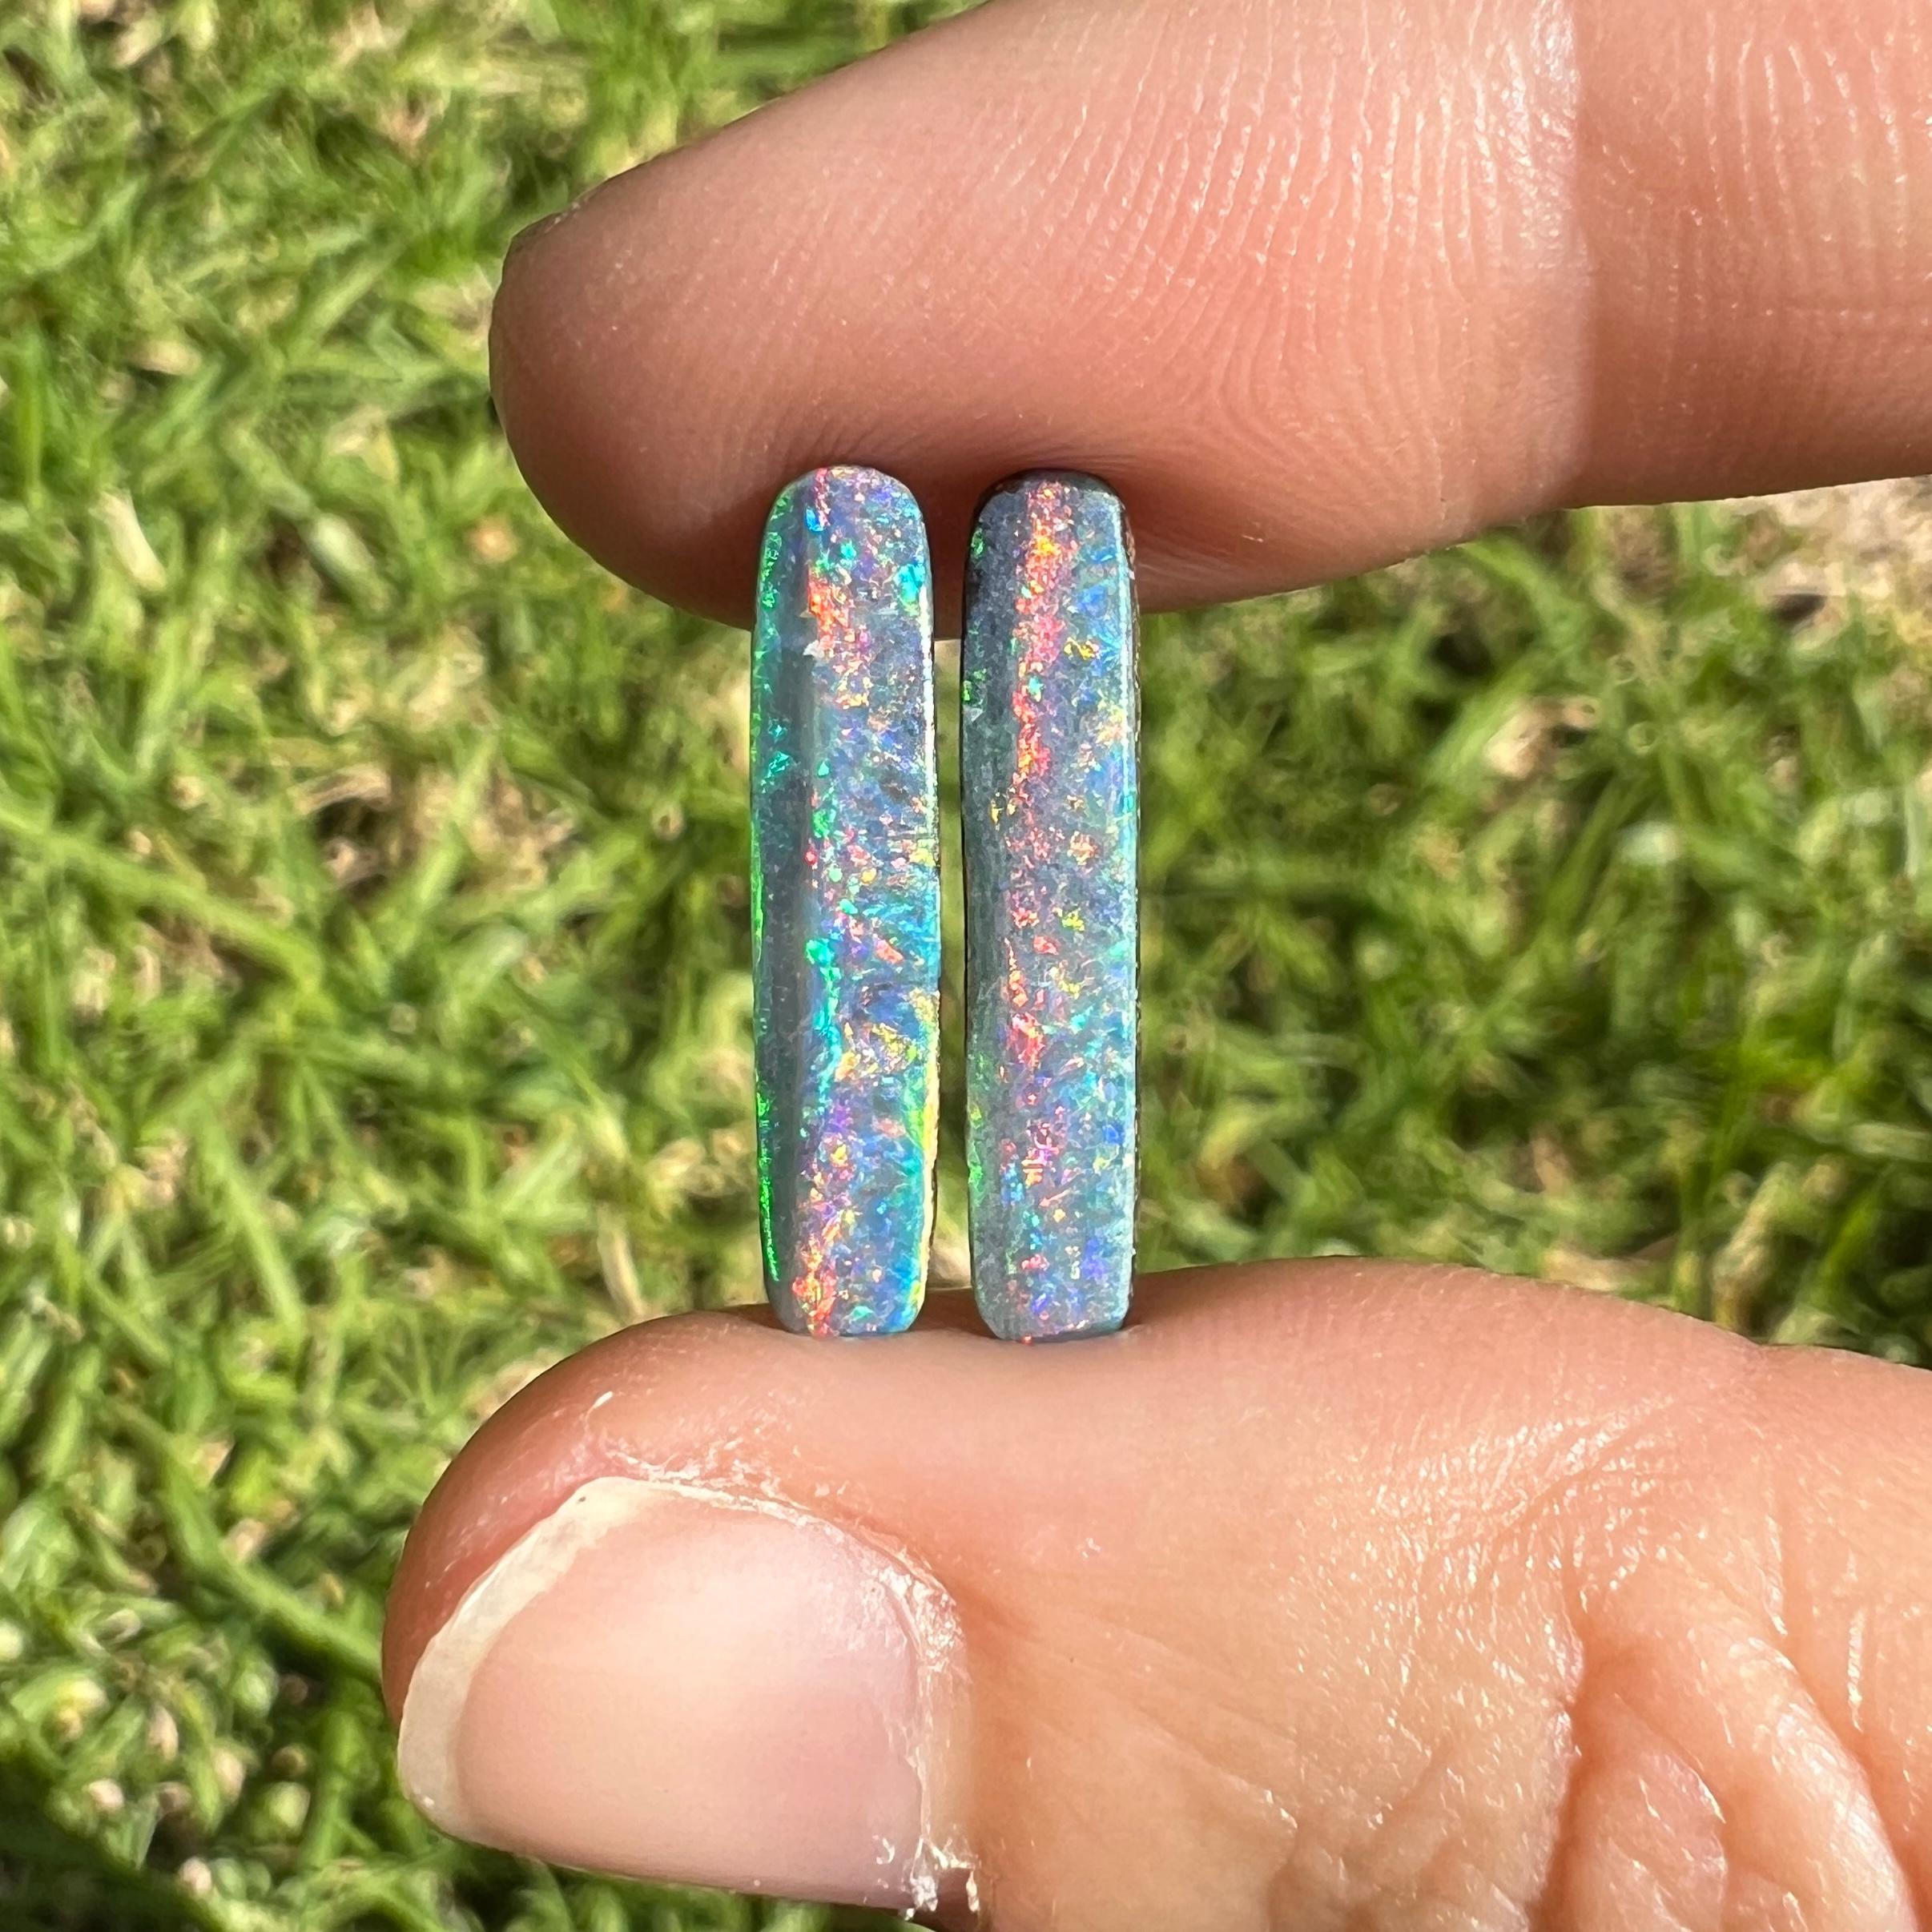 
Introducing our exquisite narrow rectangle black boulder pair! This rare 3.37 Ct Australian black boulder opal pair was mined by Sue Cooper at her Yaraka opal mine in western Queensland, Australia in 2021. Sue processed the rough opal herself and